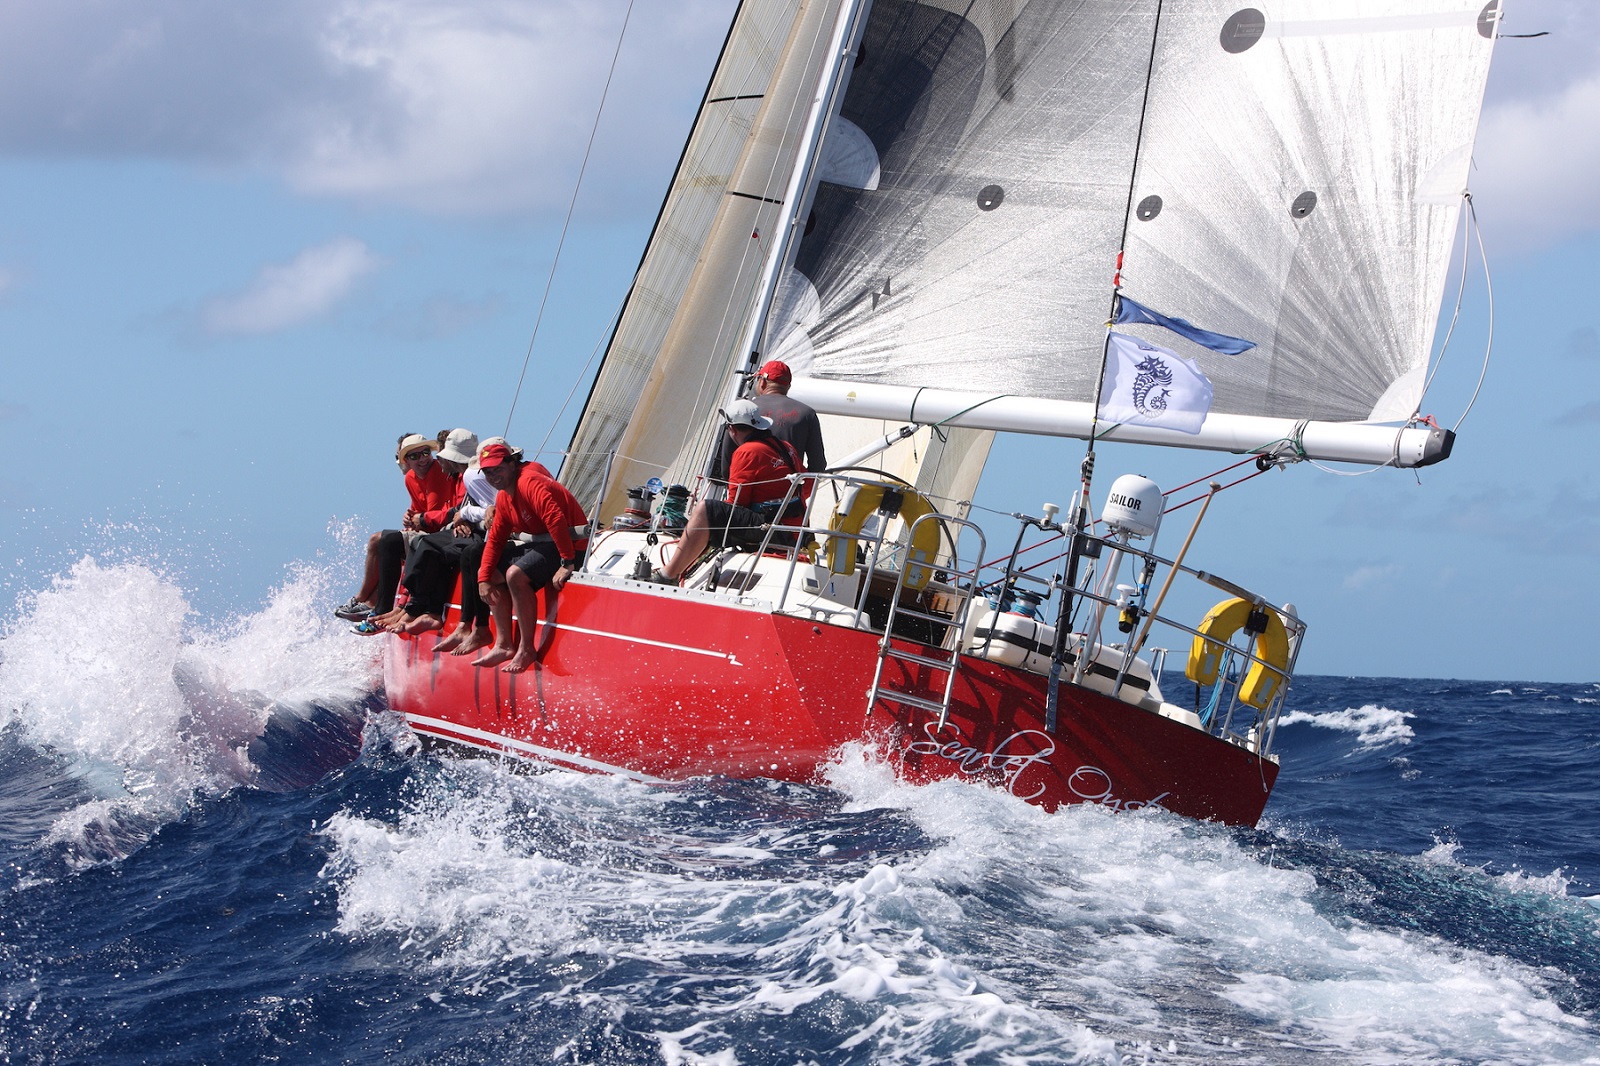 Ross Applebey will be competing in his 9th RORC Caribbean 600 with his Oyster 48 Scarlet Oyster © Tim Wright/Photoaction.com 